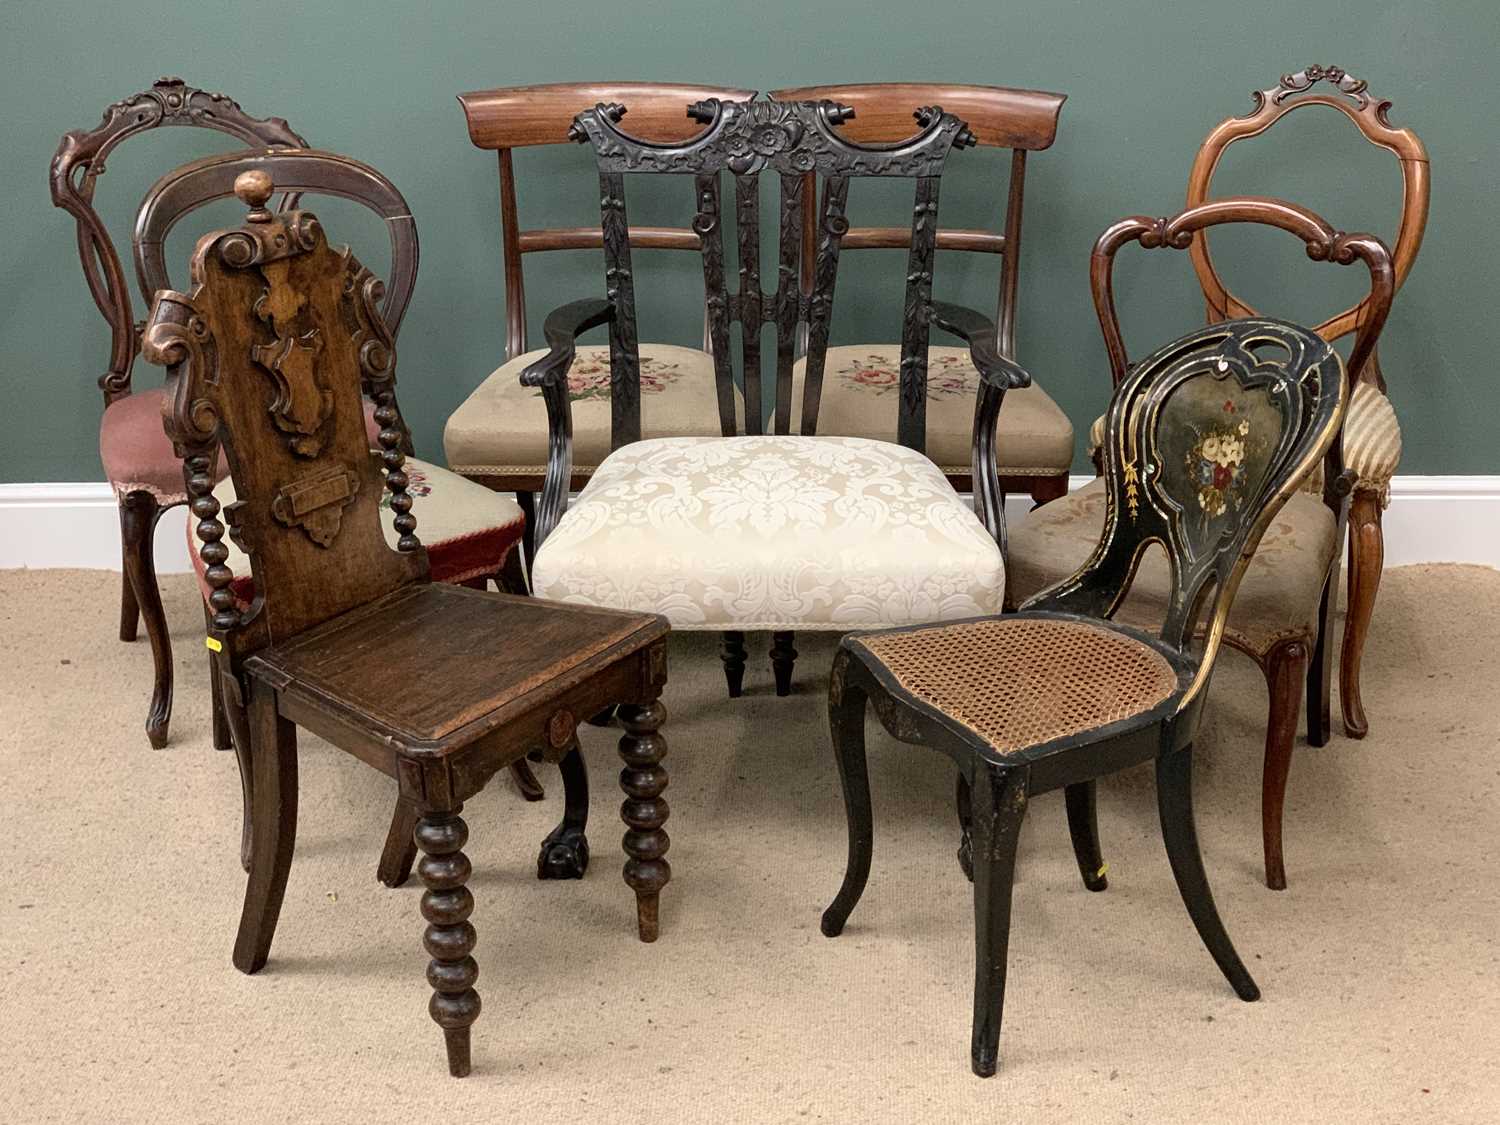 ANTIQUE CHAIR ASSORTMENT (9) to include ornate ebonized elbow chair, a twist and bobbin shield